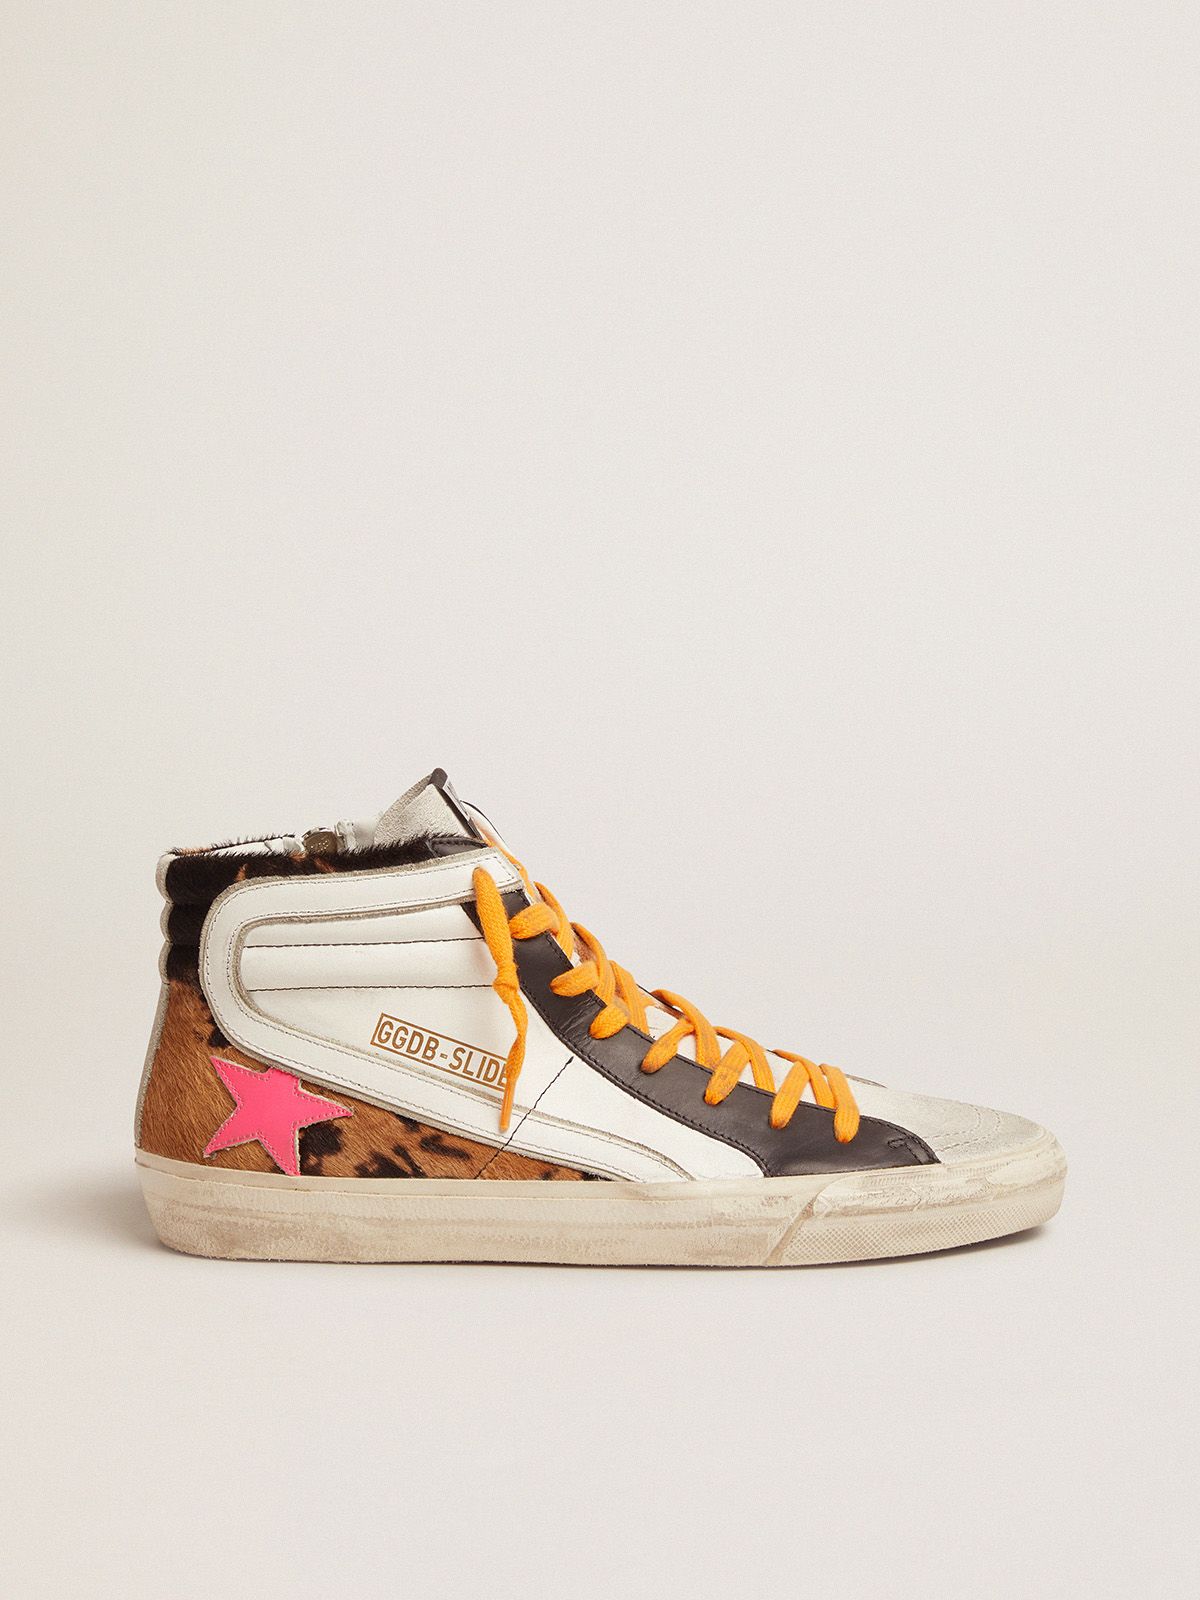 golden goose fuchsia star suede sneakers with a Slide and in laces orange leather pony skin,